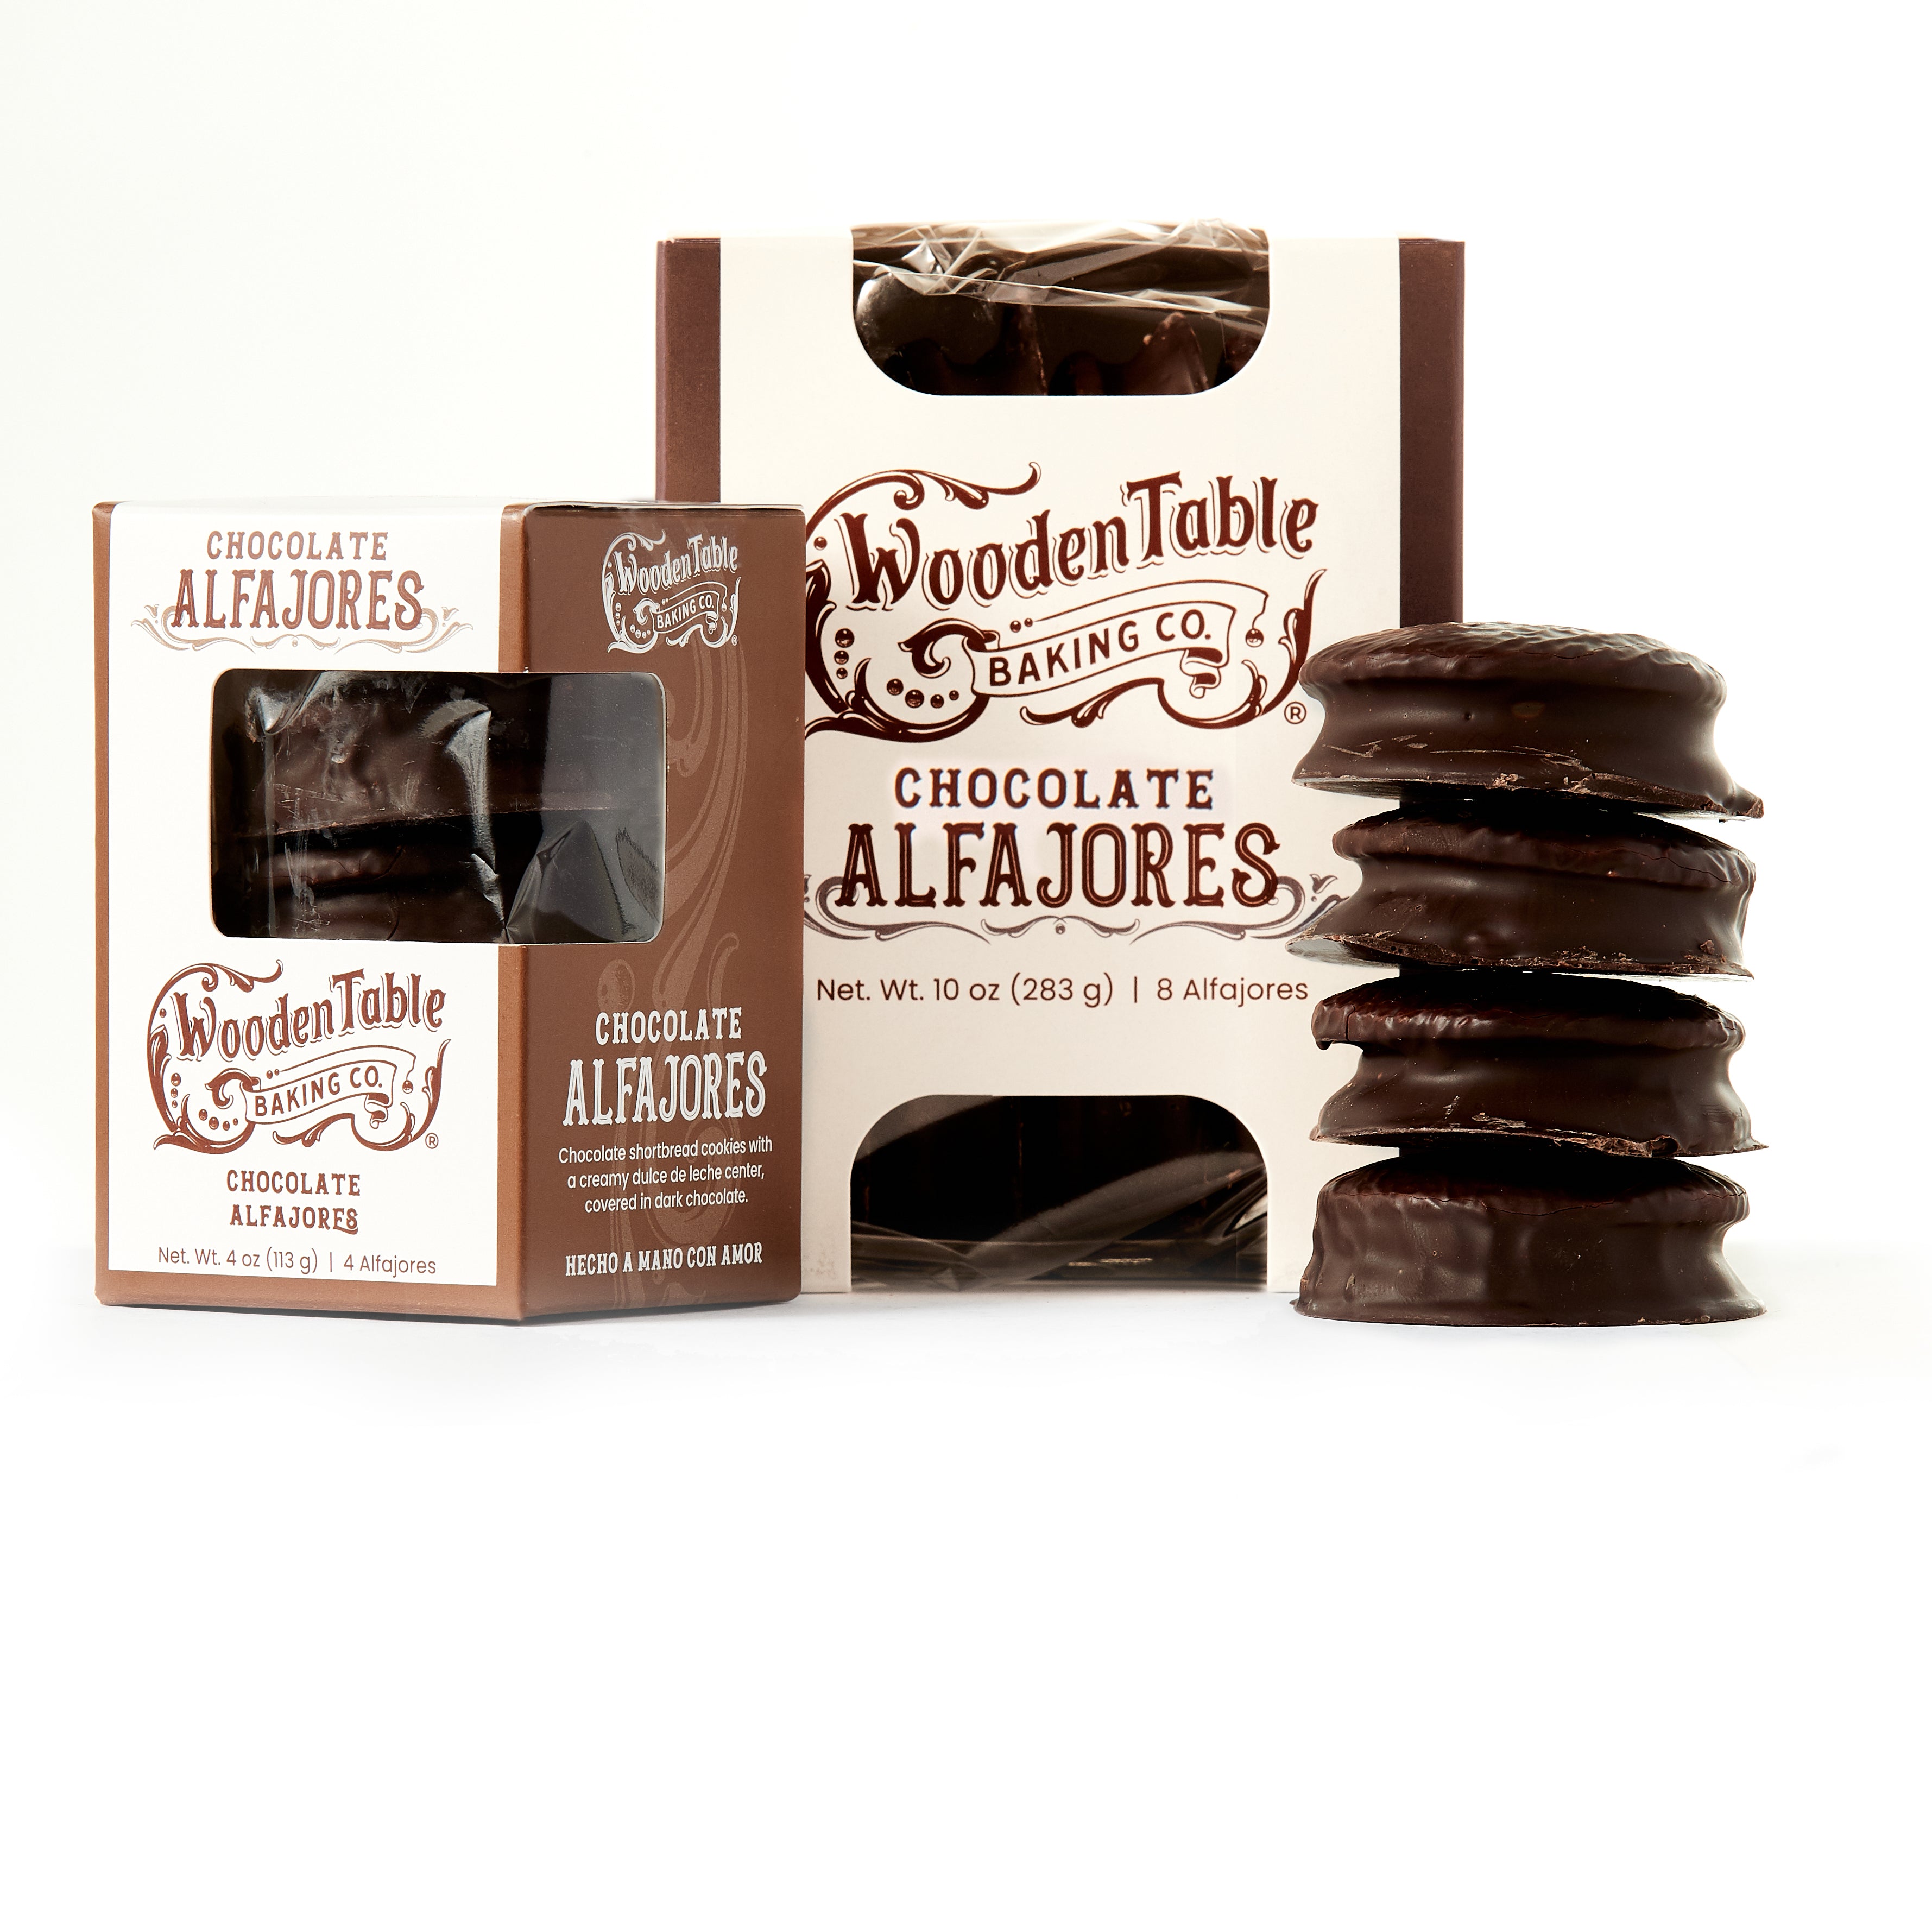 Selection of the best Argentine Alfajores x 30 Fast Shipping